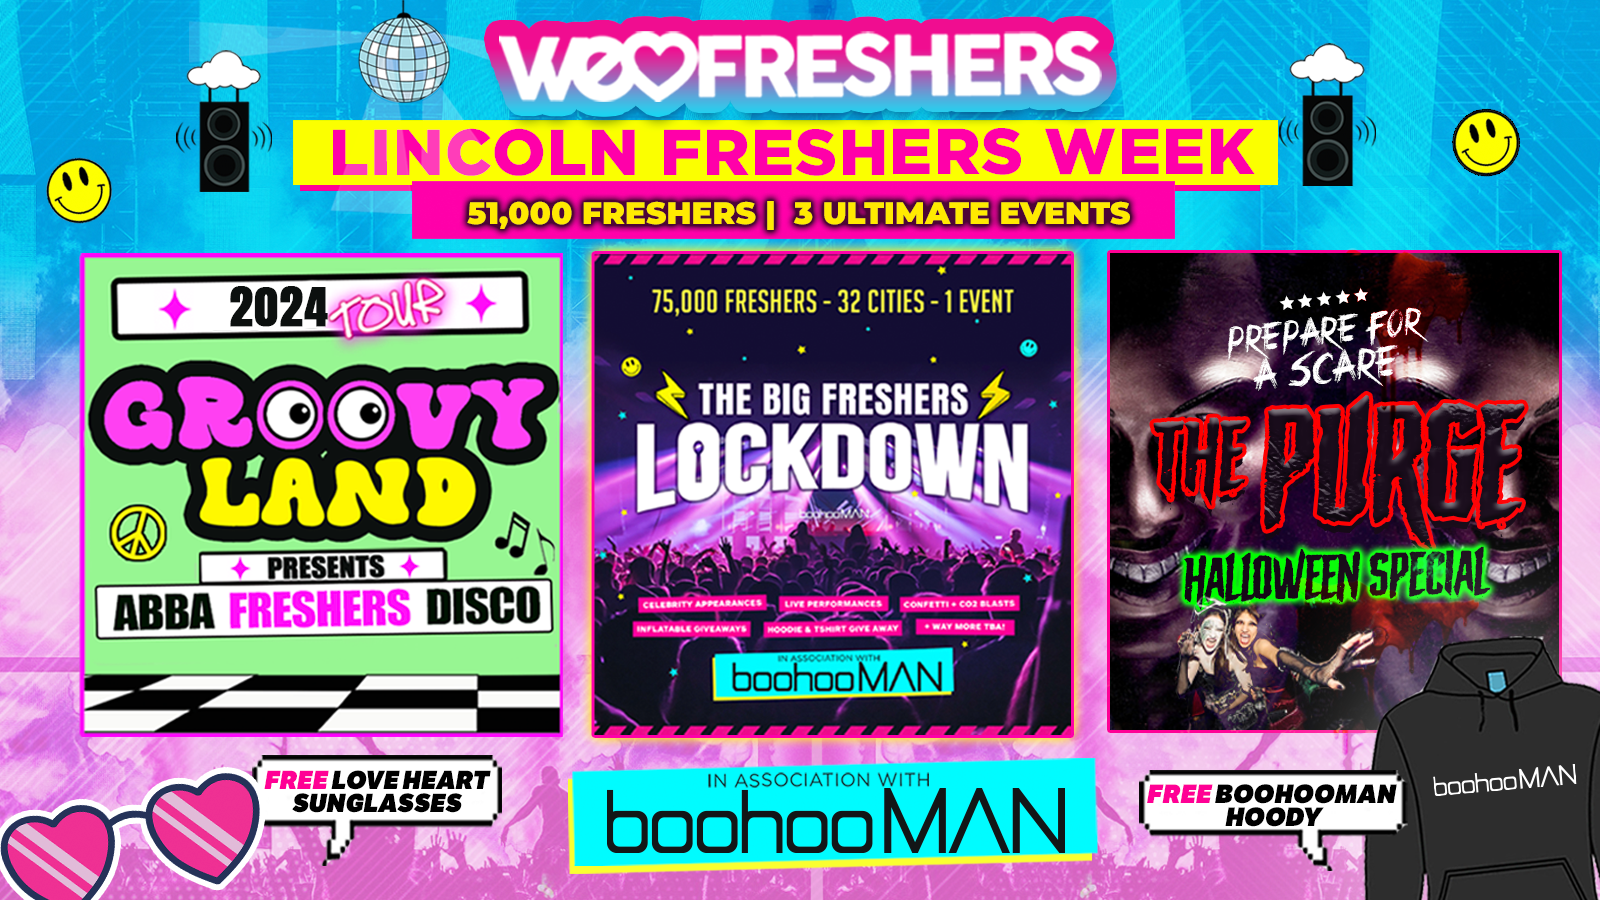 WE LOVE LINCOLN FRESHERS 2024 in association with boohooMAN – 3 EVENTS❗